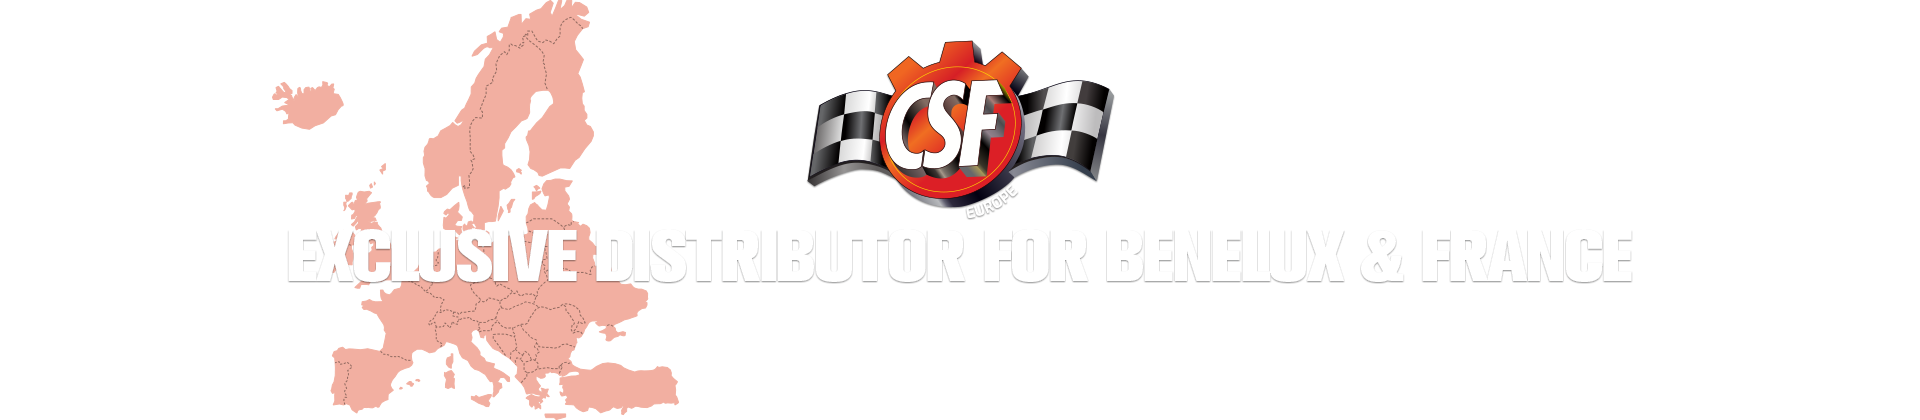 CSF - Exclusive Distributor for Europe